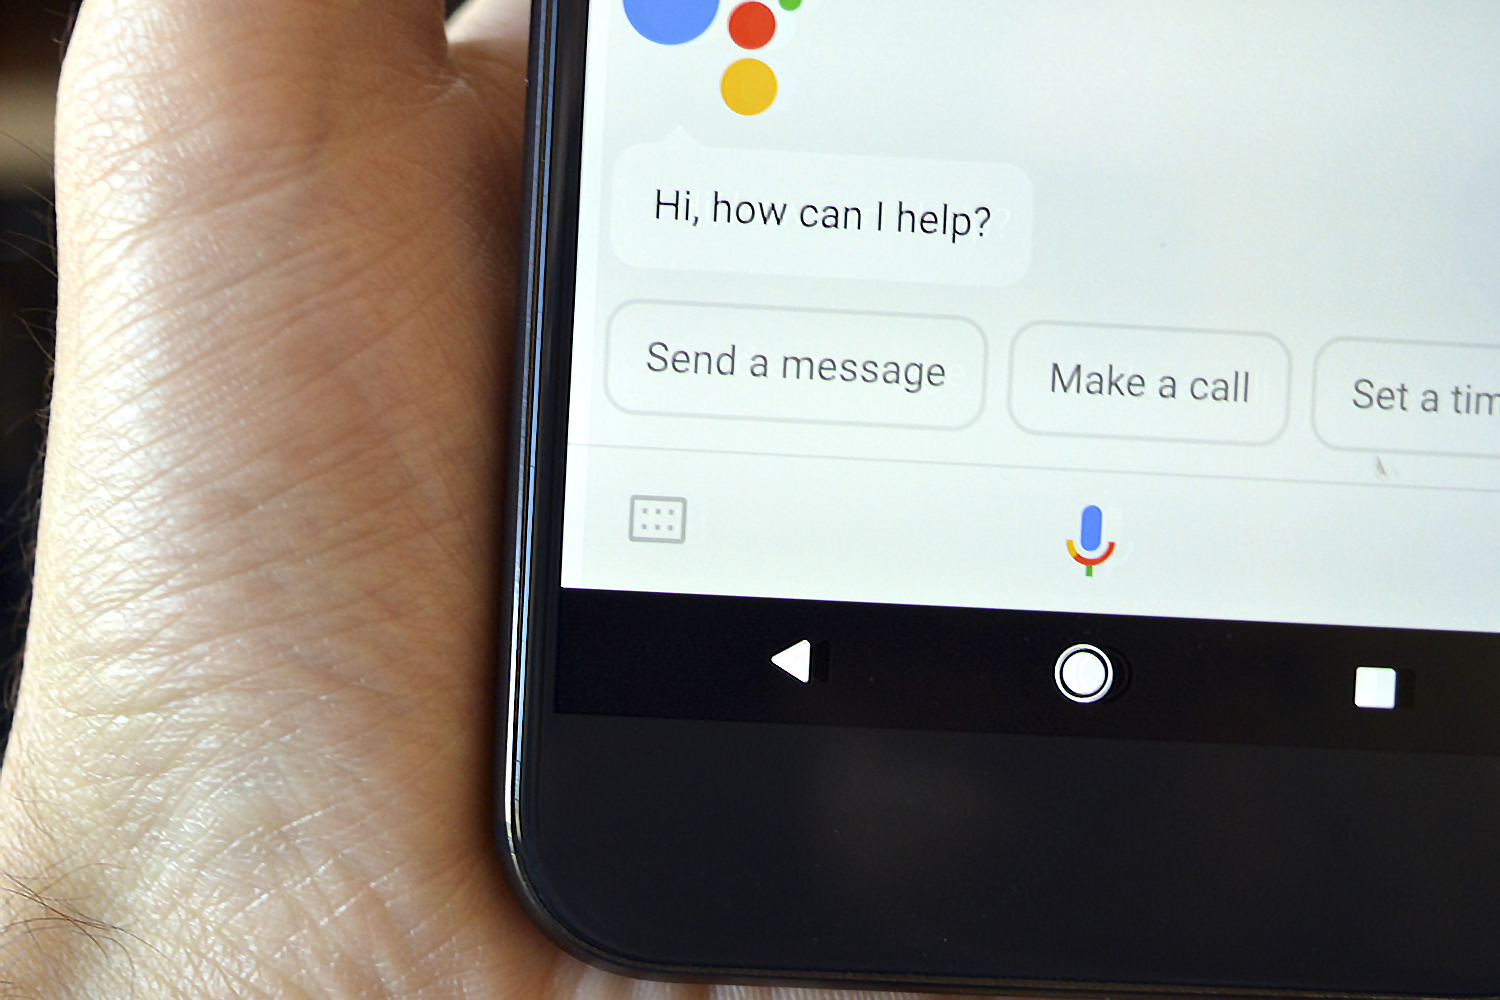 OK Google Voice Commands Guide - Apps on Google Play